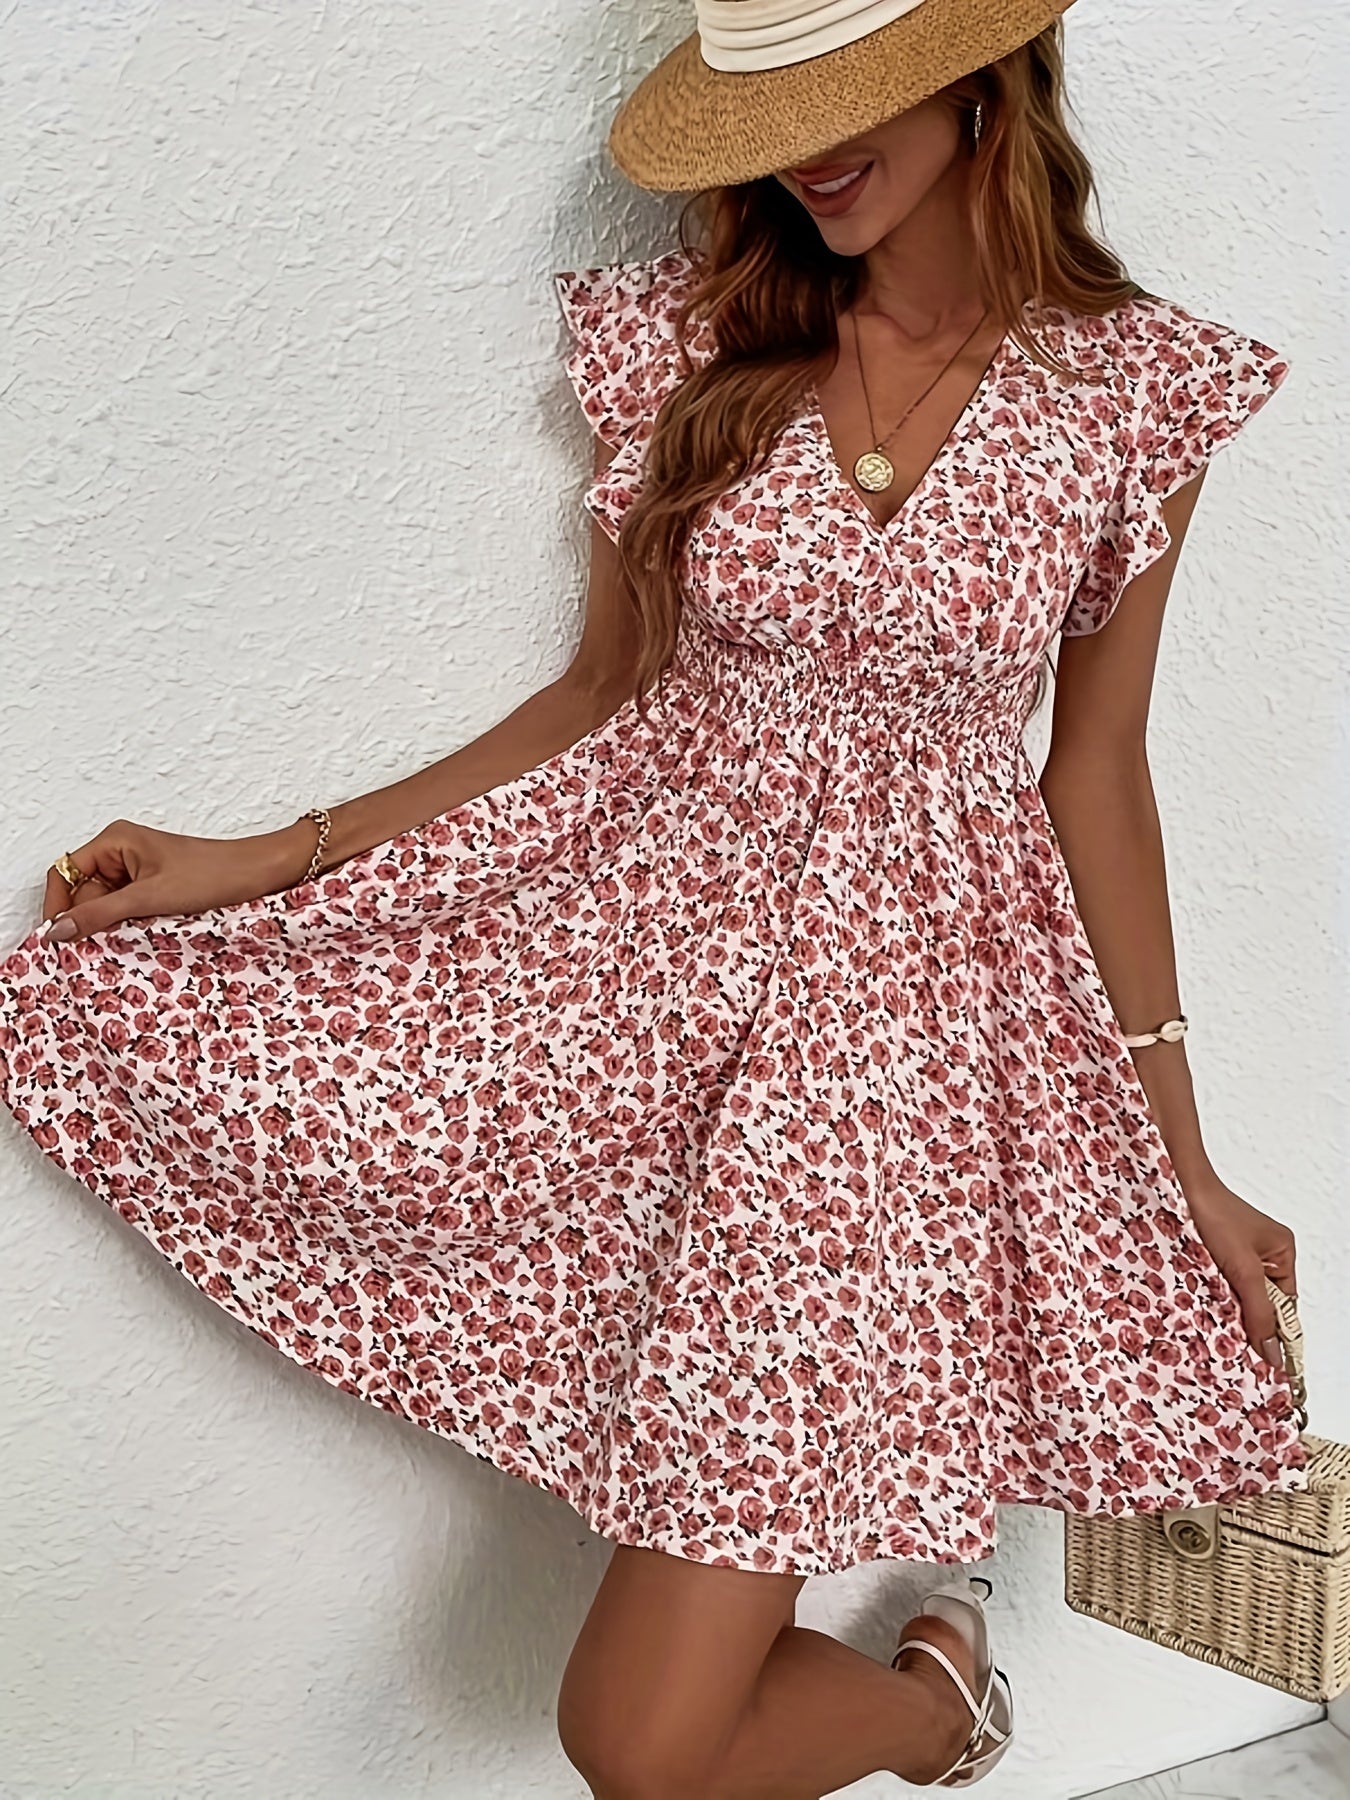 「binfenxie」Floral Print V Neck Vacation Dress, Smocked Waist Ruffle Sleeve Casual Dress For Summer & Spring, Women's Clothing